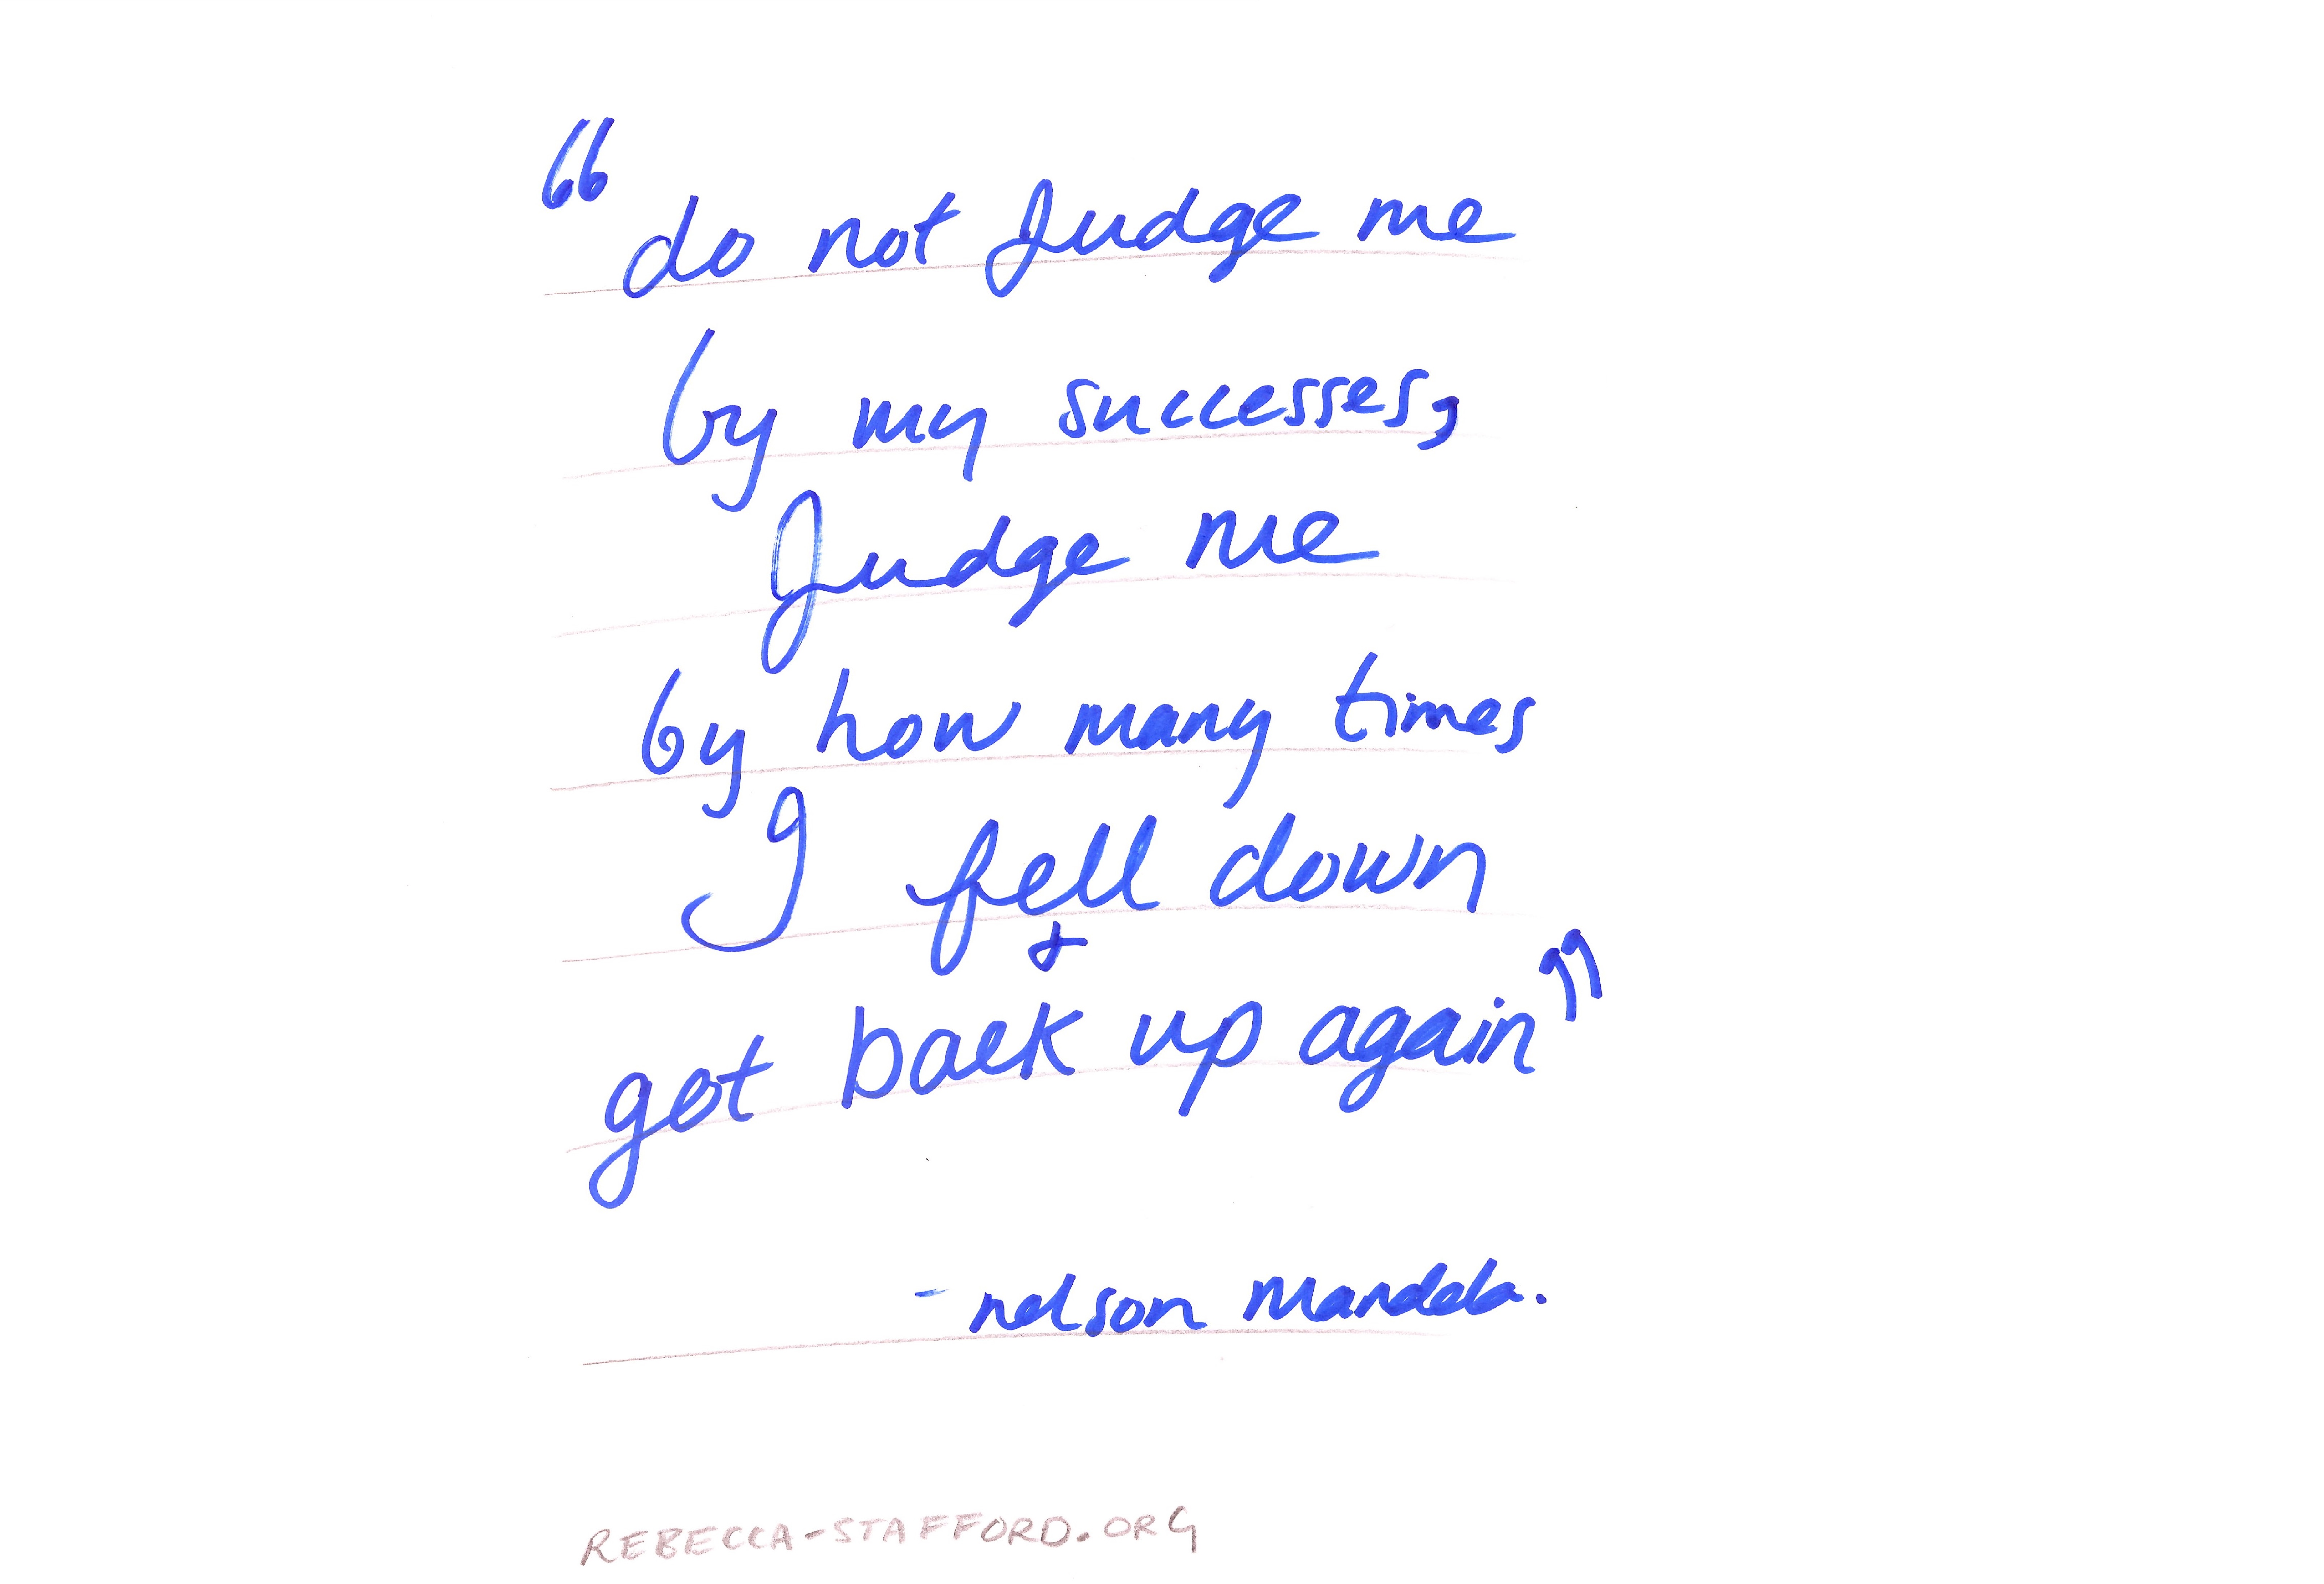 Do not judge me by my successes, judge me by how many times I fell down and got back up again - Nelson Mandela